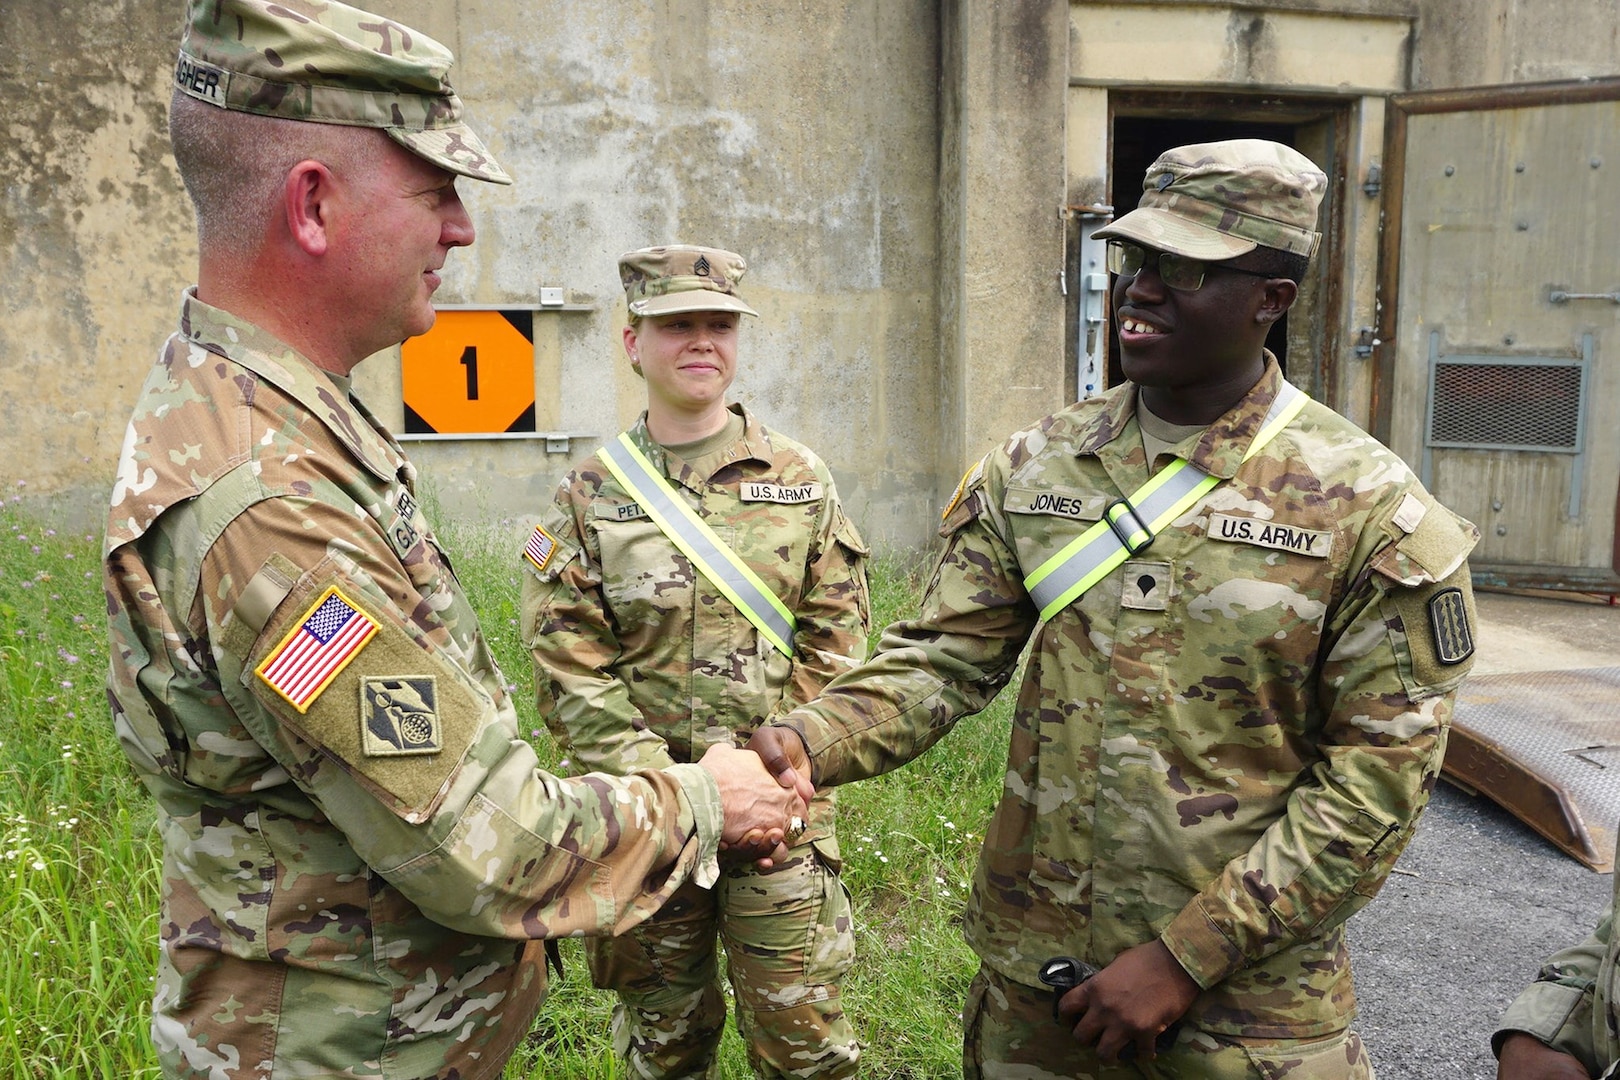 1173rd conducts real-world transportation mission in Pennsylvania